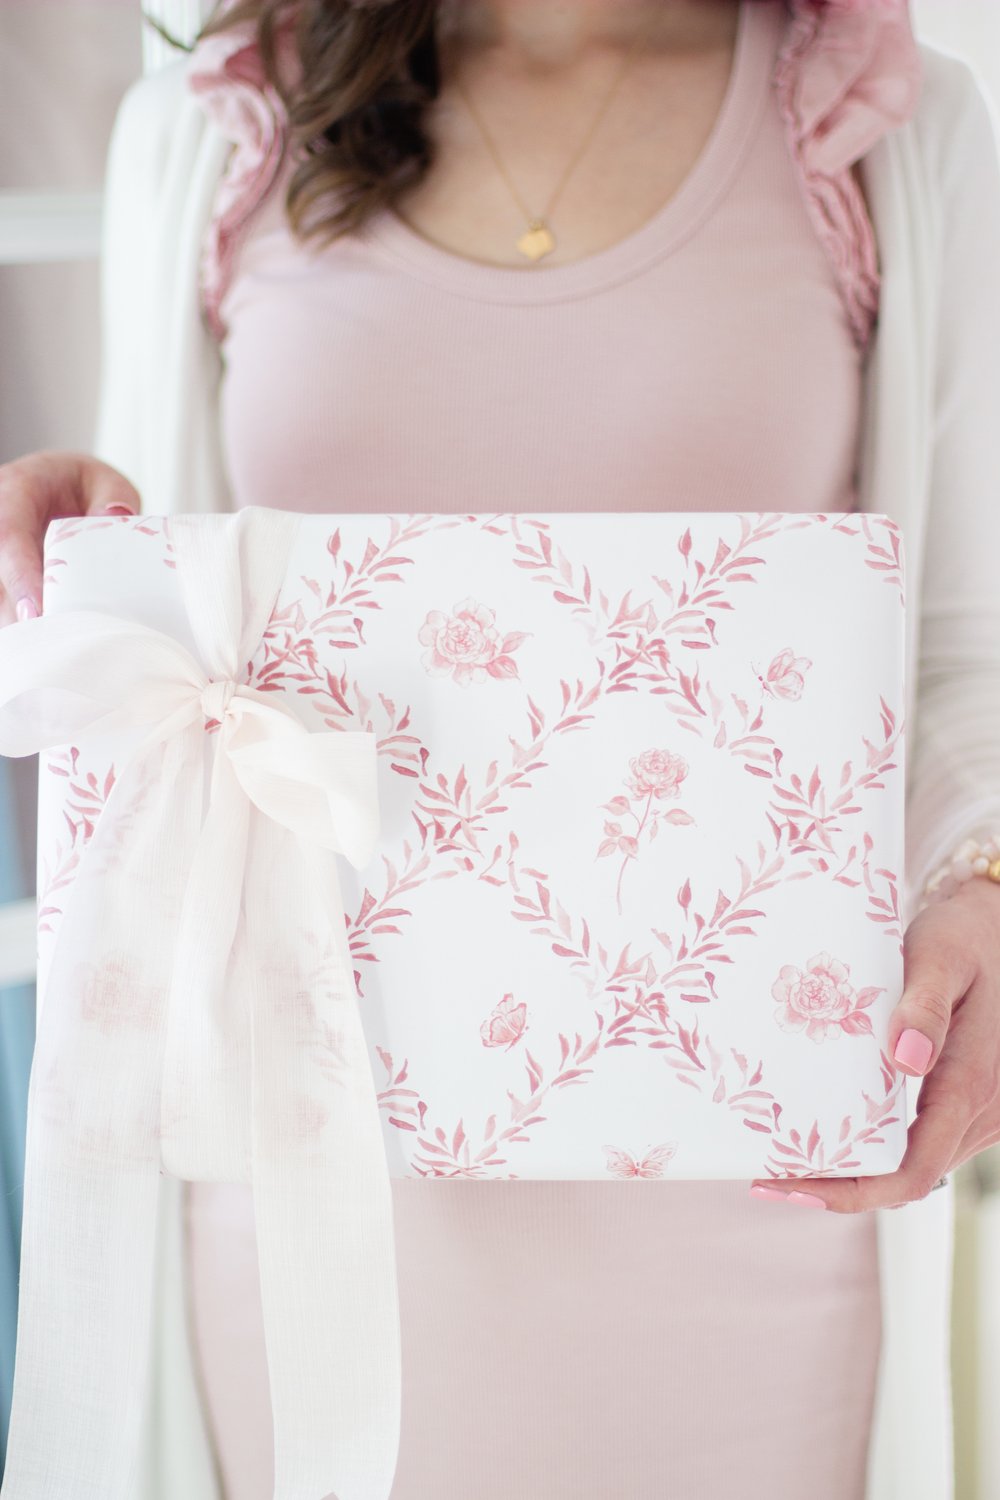 Pink Wrapping Paper, Floral Wrapping Paper, Gifts for Her